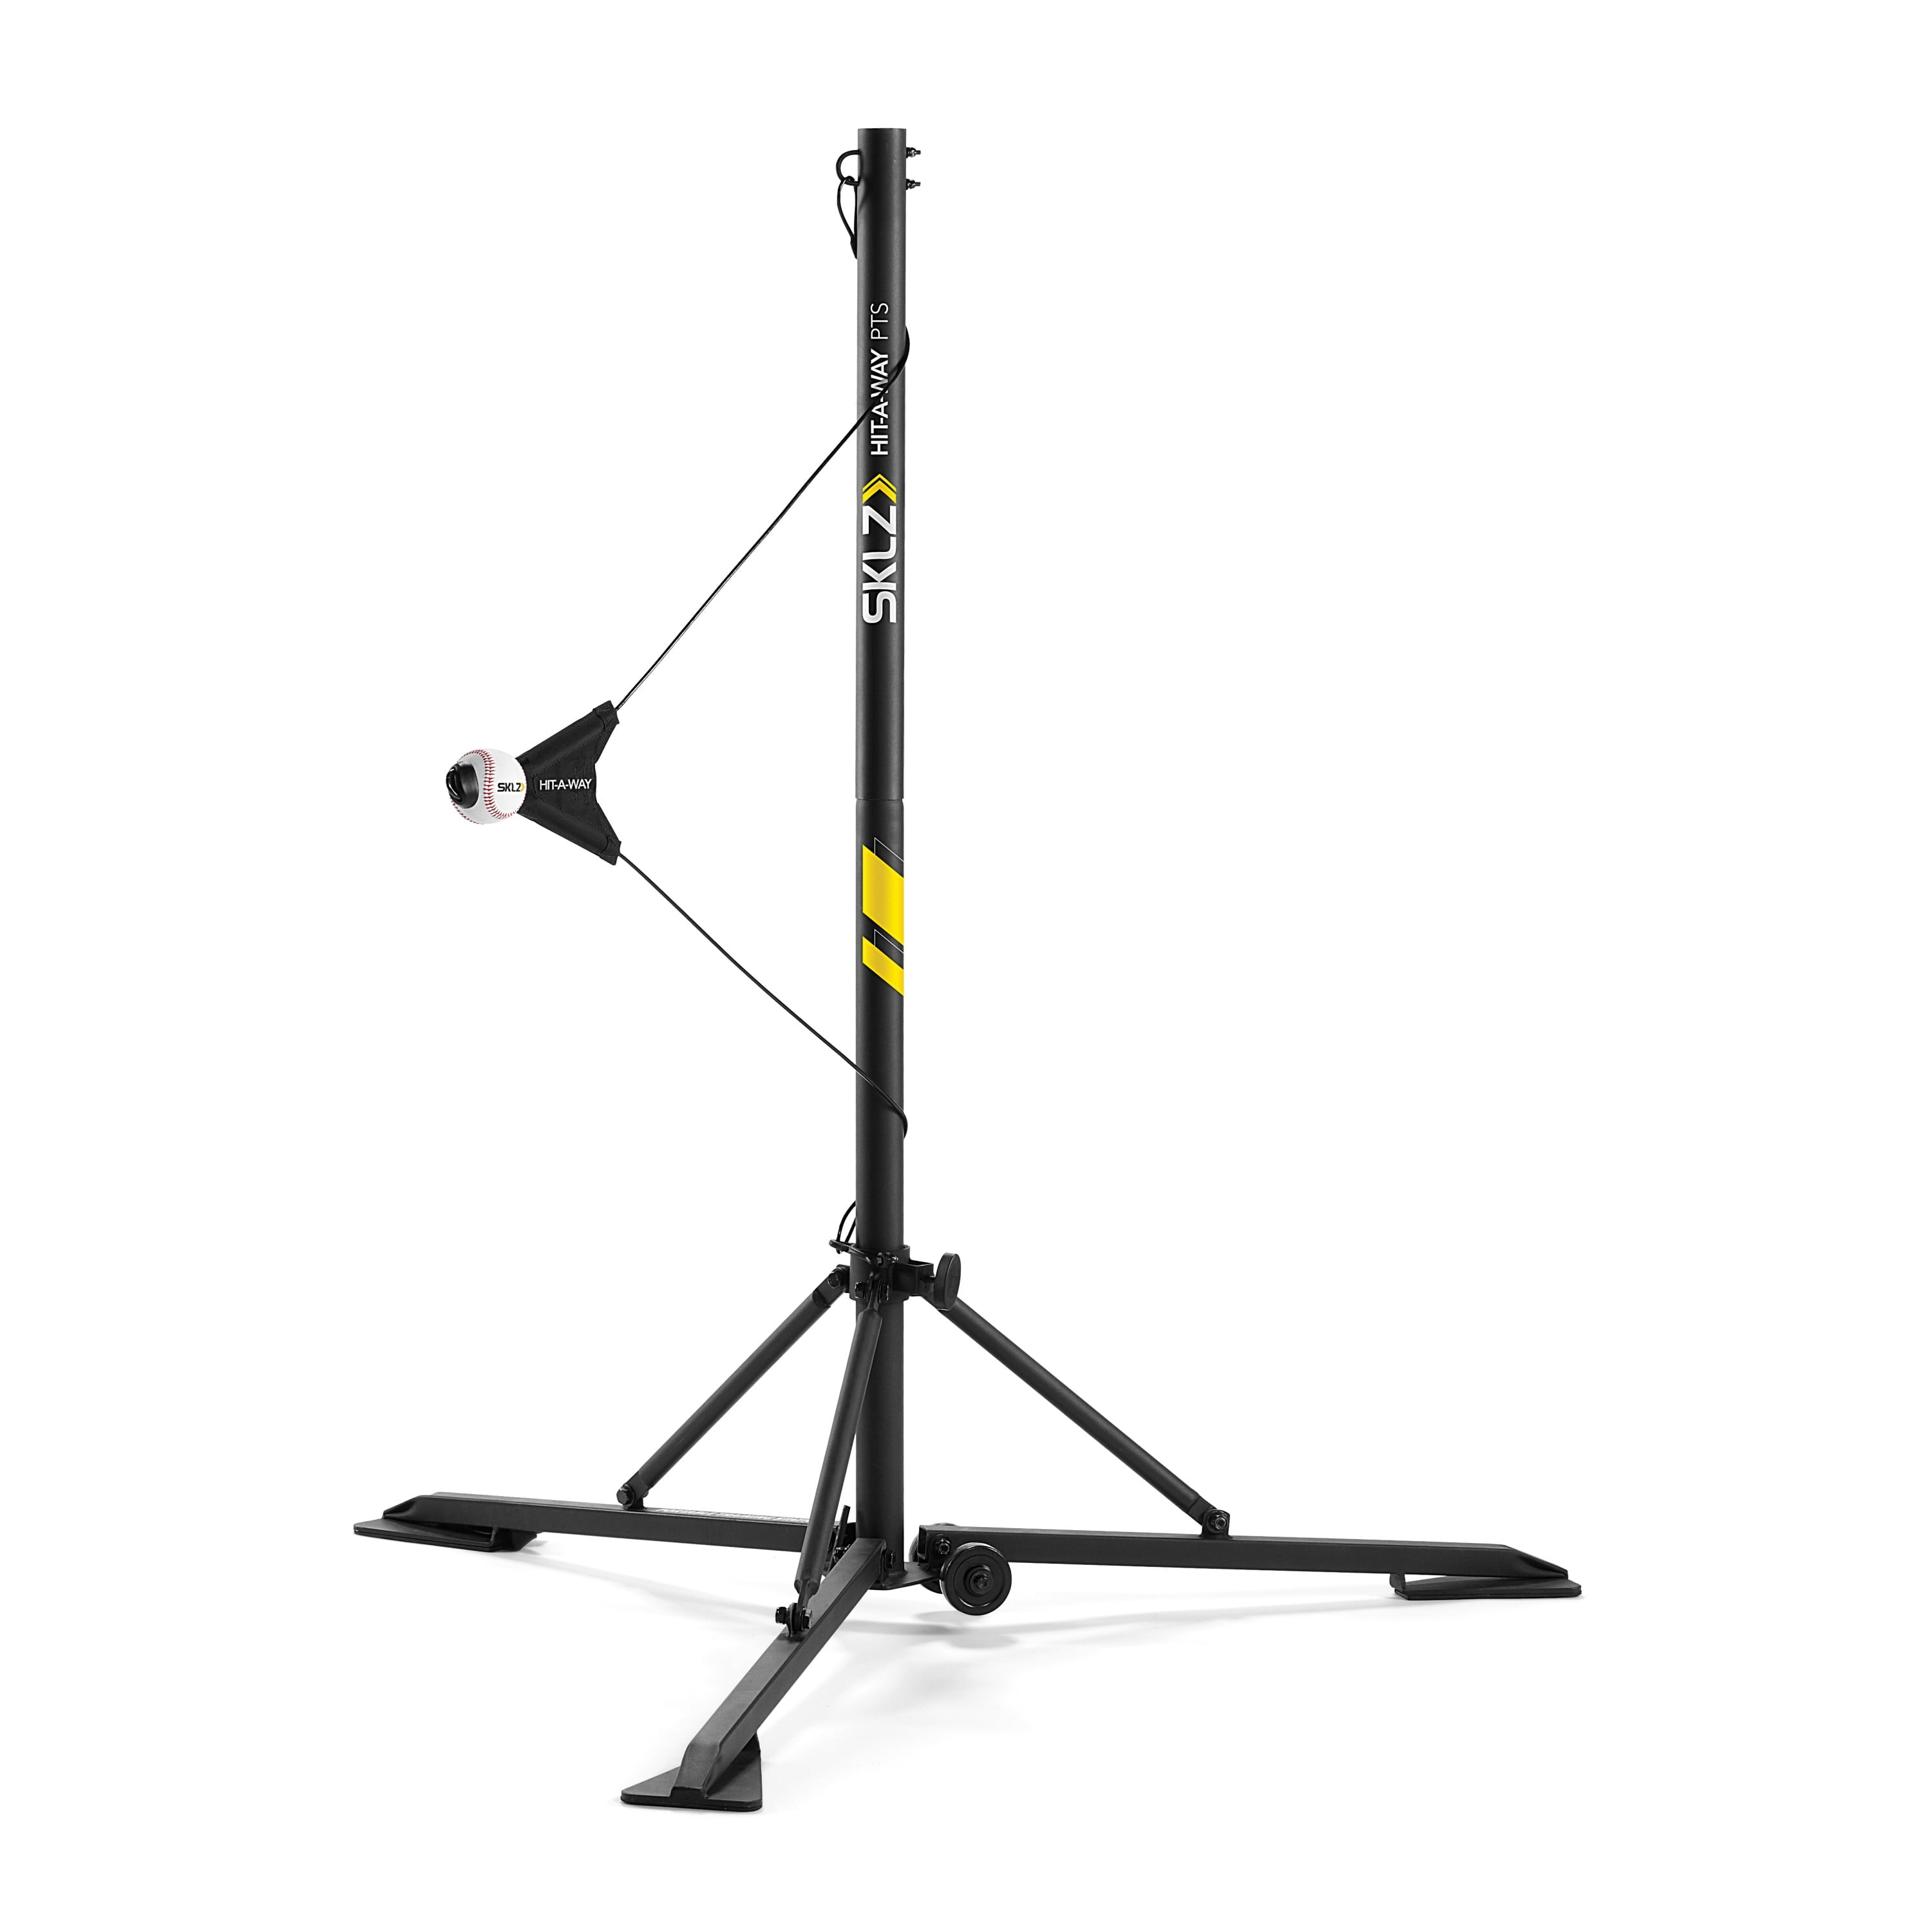 Details about   Hit-A-Way SKLZ Swing Trainer for Softball Improve Your Batting Strength Sport nw 